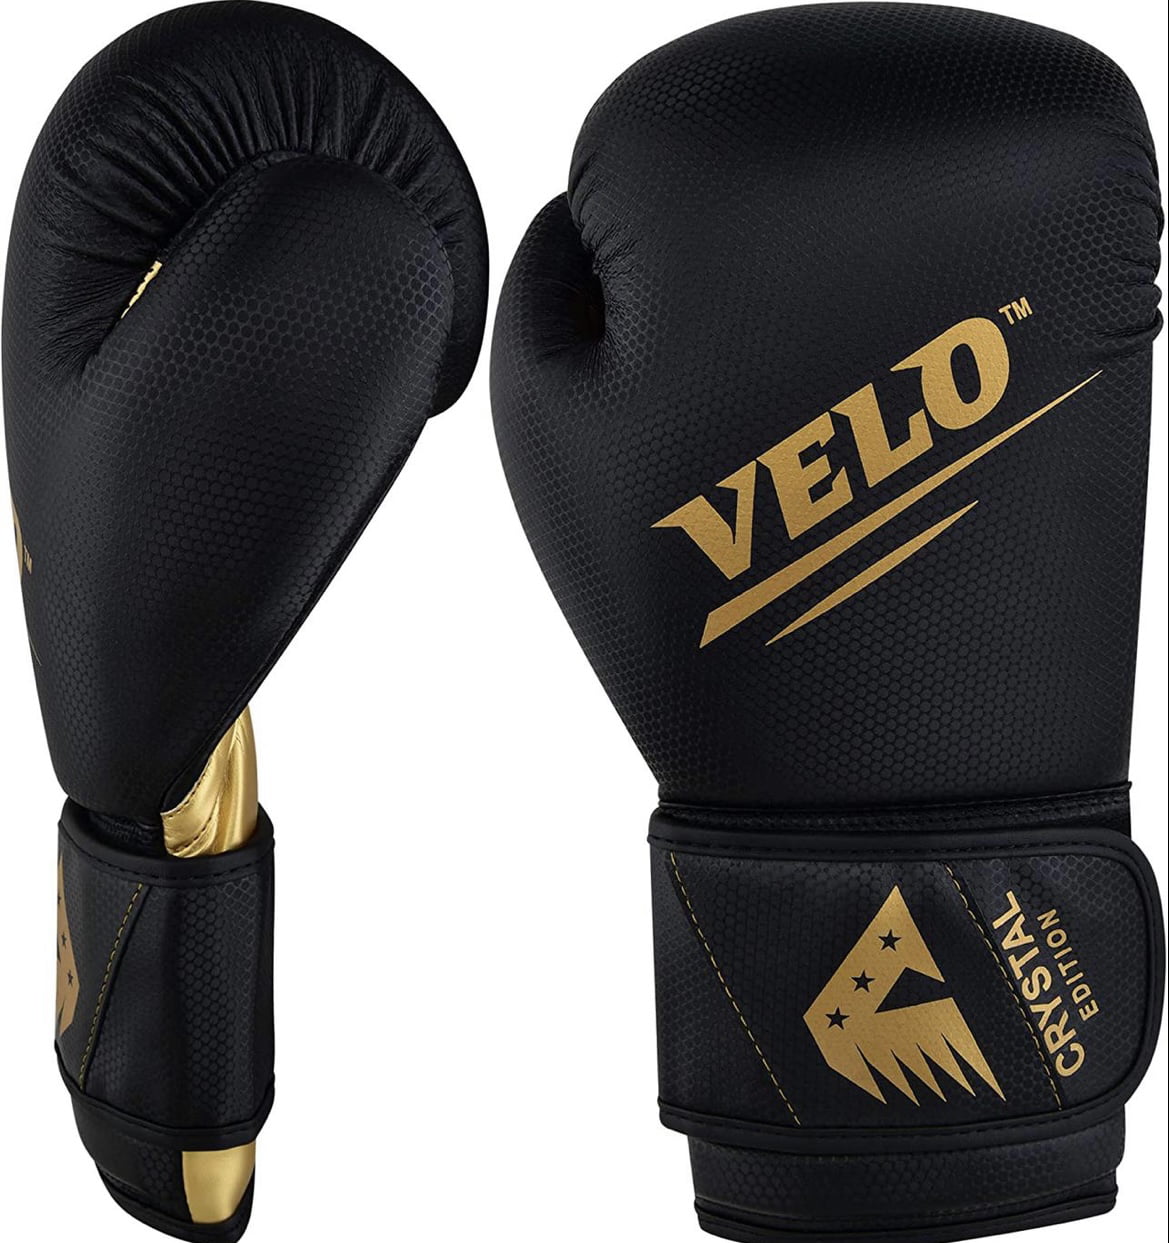 VELO Leather Boxing Gloves MMA Fighting Sparring Punch Bag Training Muay Thai H 